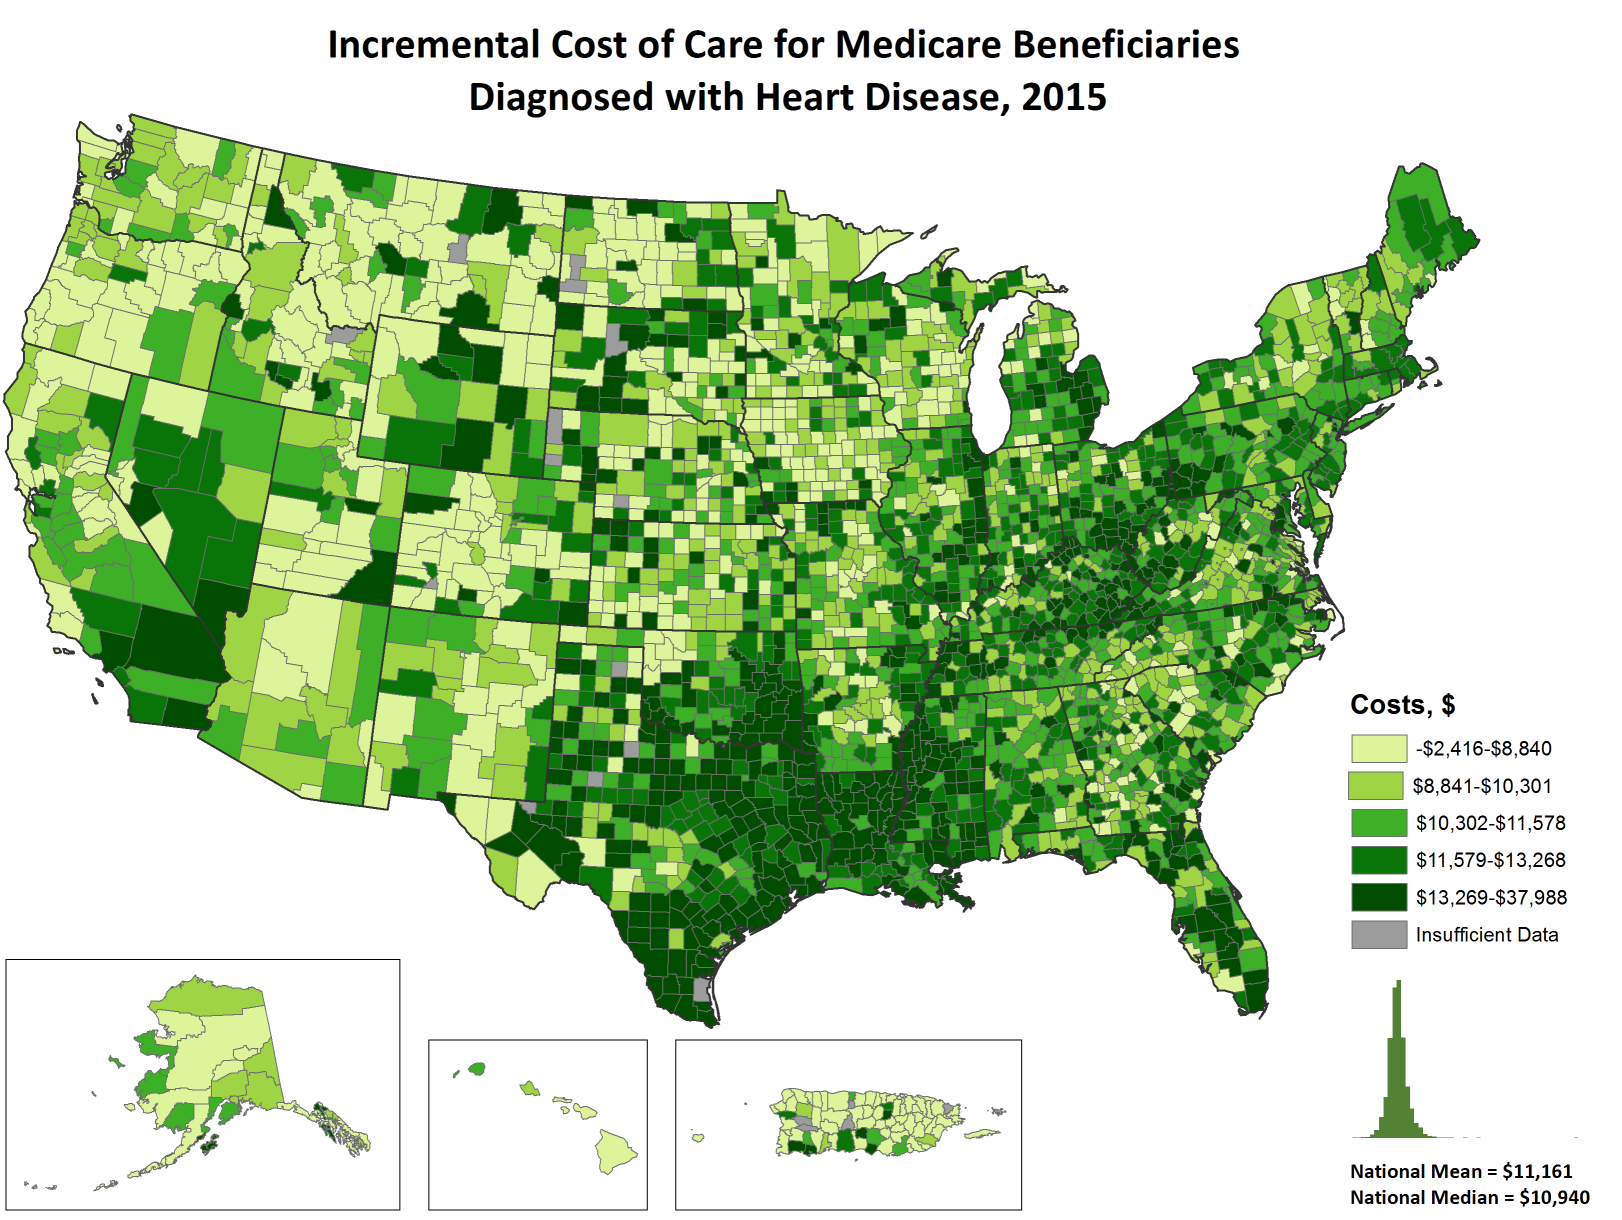 Incremental Costs of Care per Capita for FFS Medicare beneficiaries diagnosed with Heart Disease, 2015: Total Costs, by county. This map shows the concentrations of counties with the highest incremental total costs per capita – meaning the top quintile – are located primarily in Texas, Oklahoma, Louisiana, Mississippi, Ohio, Kentucky, Pennsylvania, Michigan, and Florida, with pockets located in southern California, Nevada, Wyoming, South Dakota, southeastern Utah, eastern Illinois, and West Virginia.